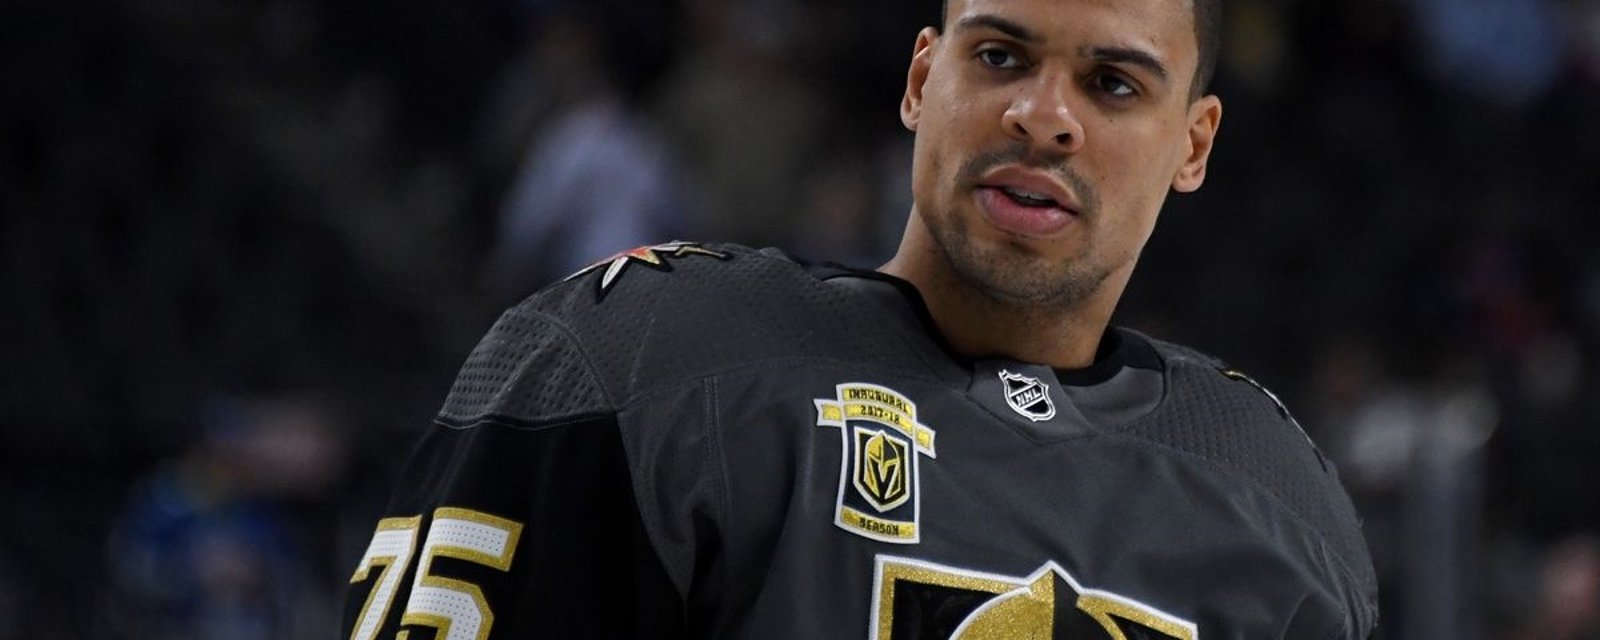 Rangers sign enforcer Ryan Reaves to a contract extension.